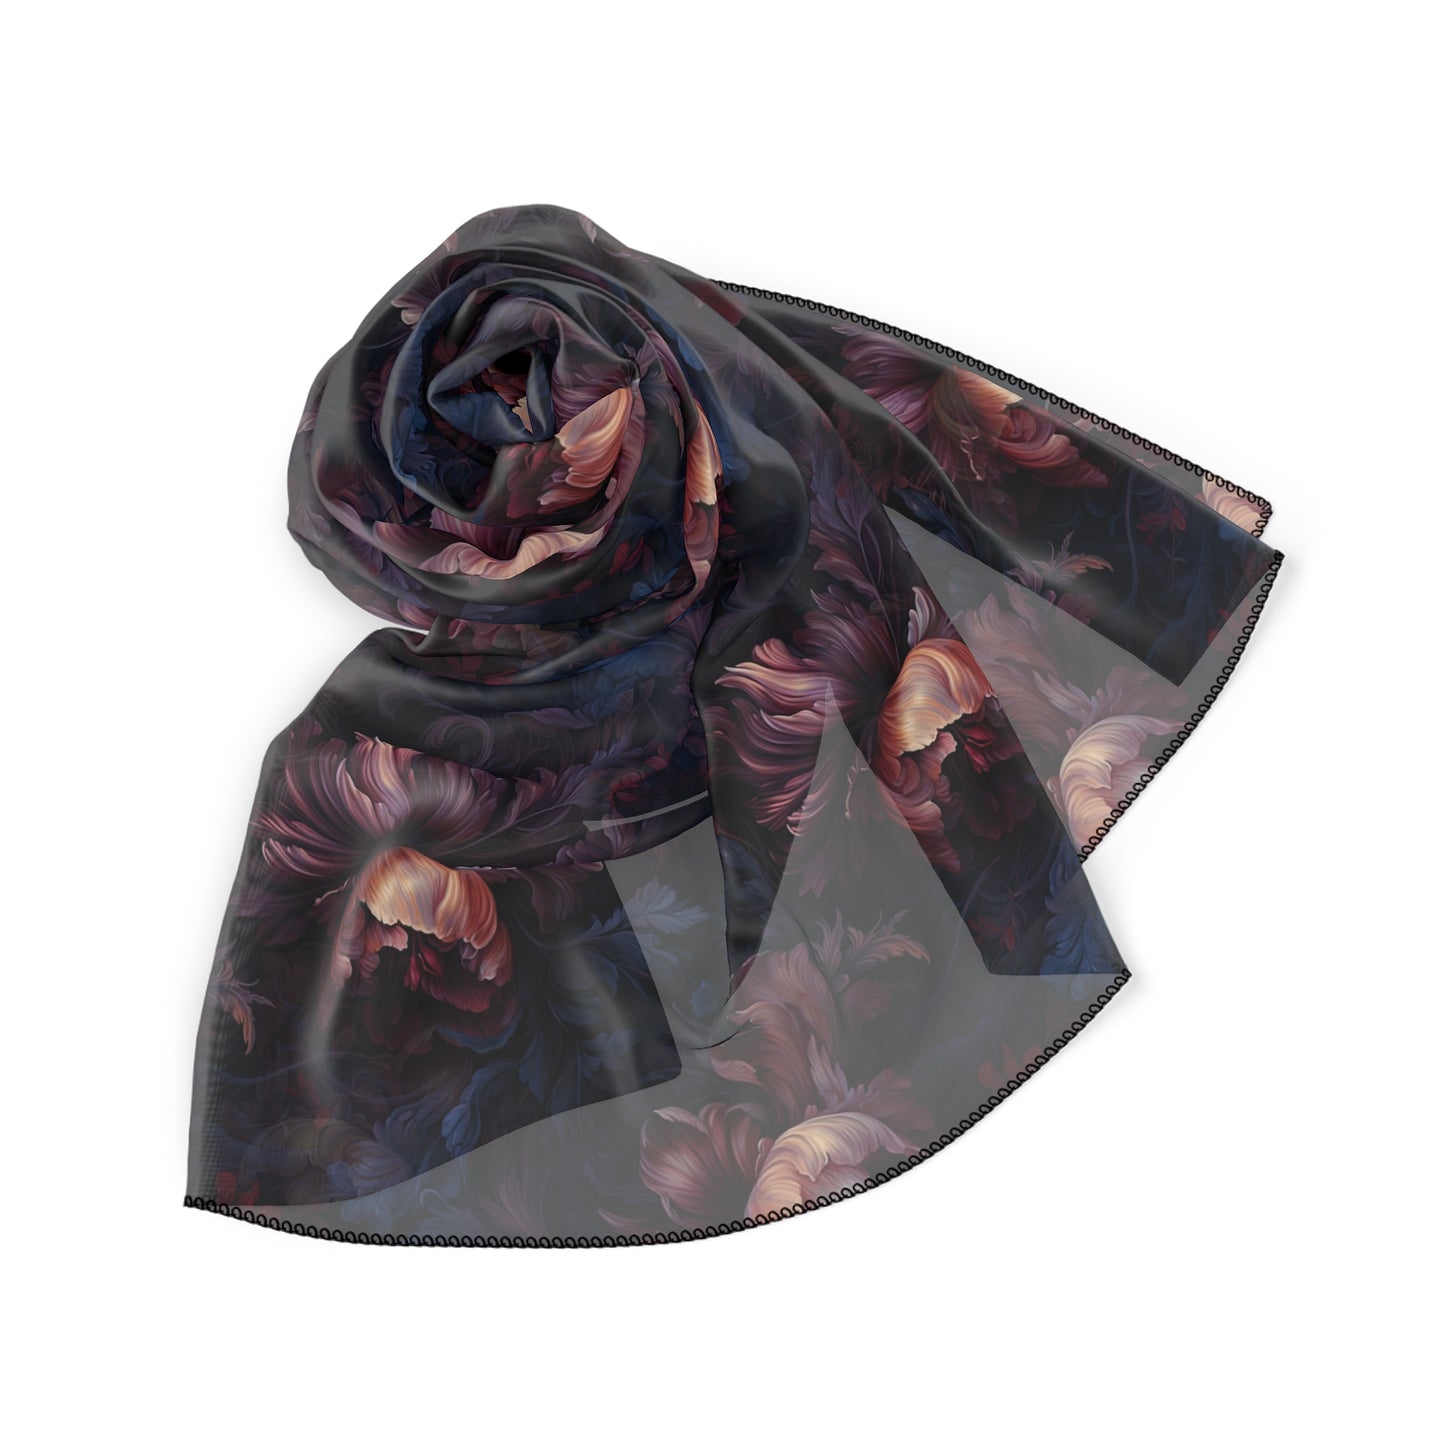 Dark Flowers & Roses Gothic Witches Veil | Witchy Pagan Scarf